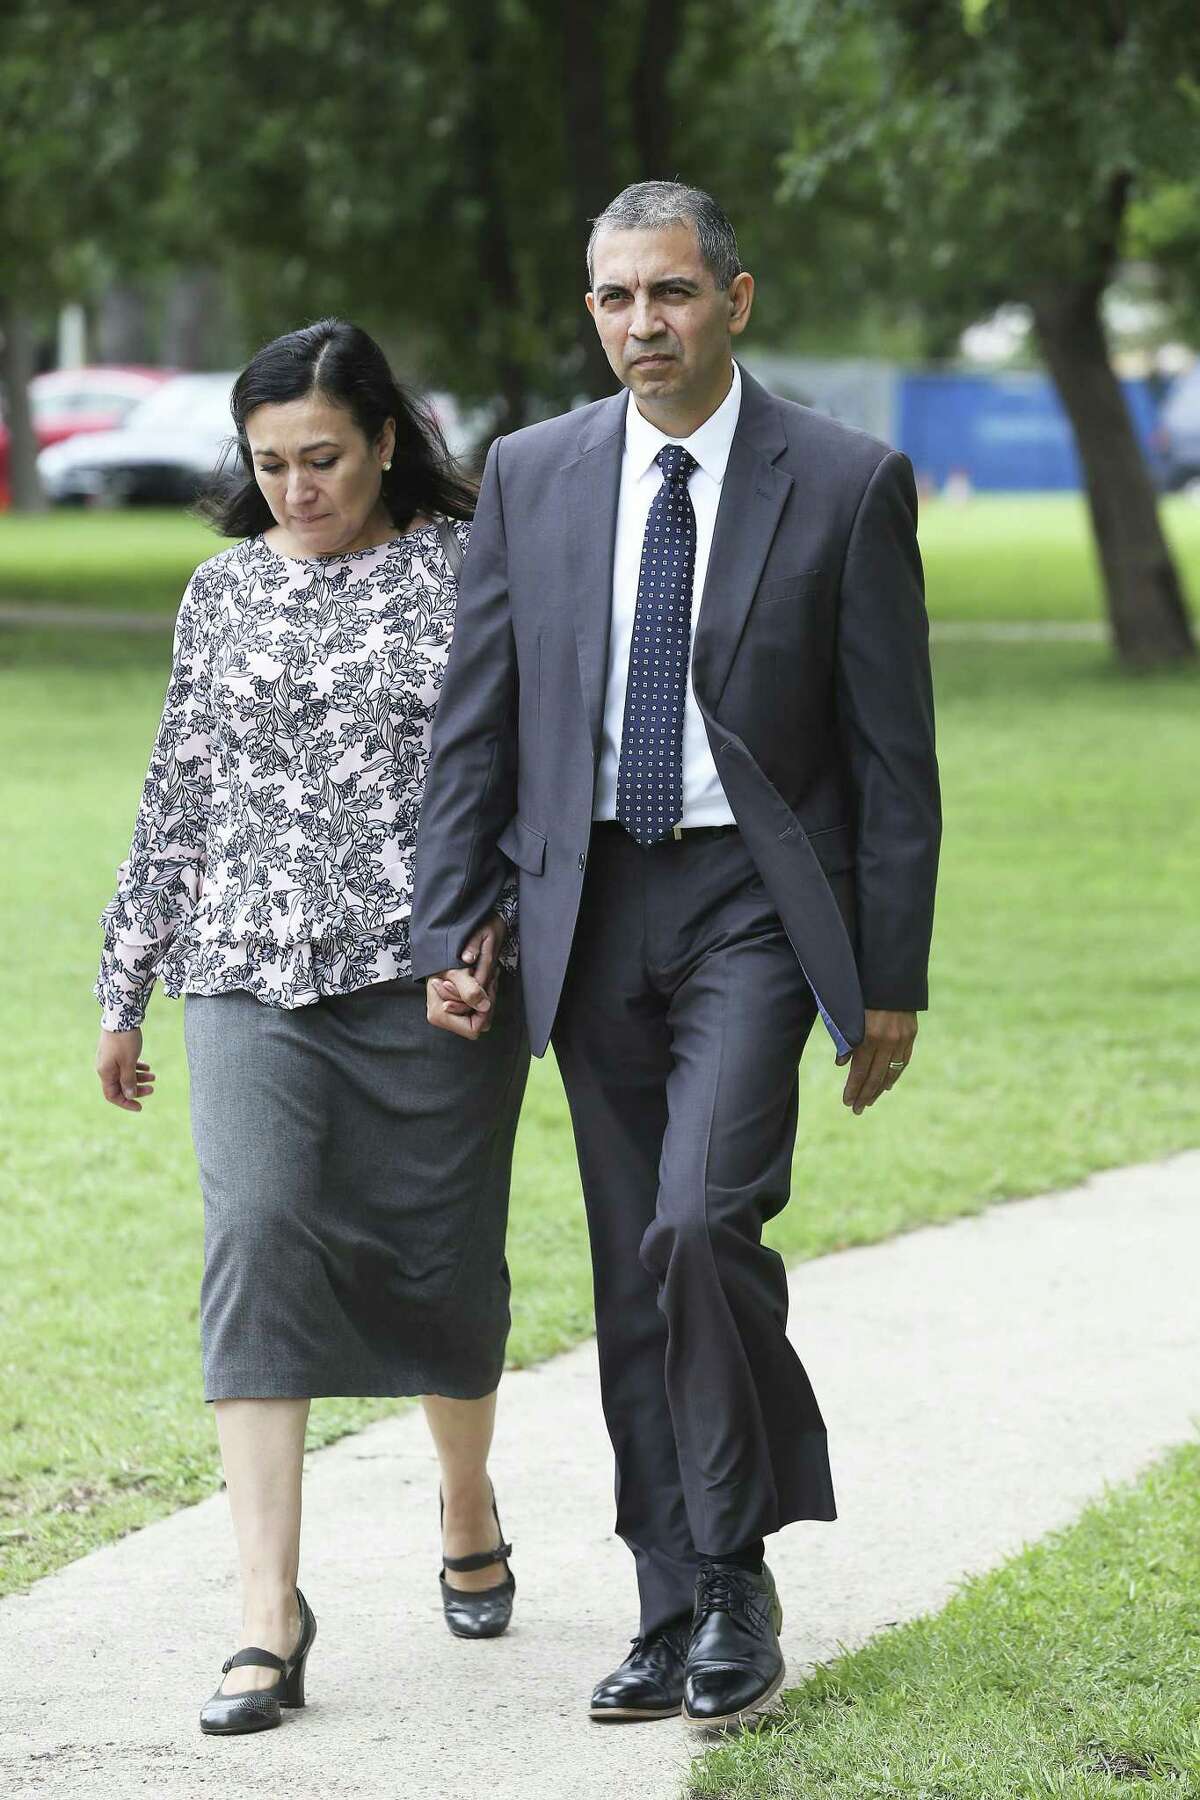 Enrique Gonzalez walks from the federal courthouse with his wife Gladys Gonzalez on Tuesday after he was found guilty on lewd behavior charges aboard an airliner earlier this year. Friday, he was fined $500 but no jail time.